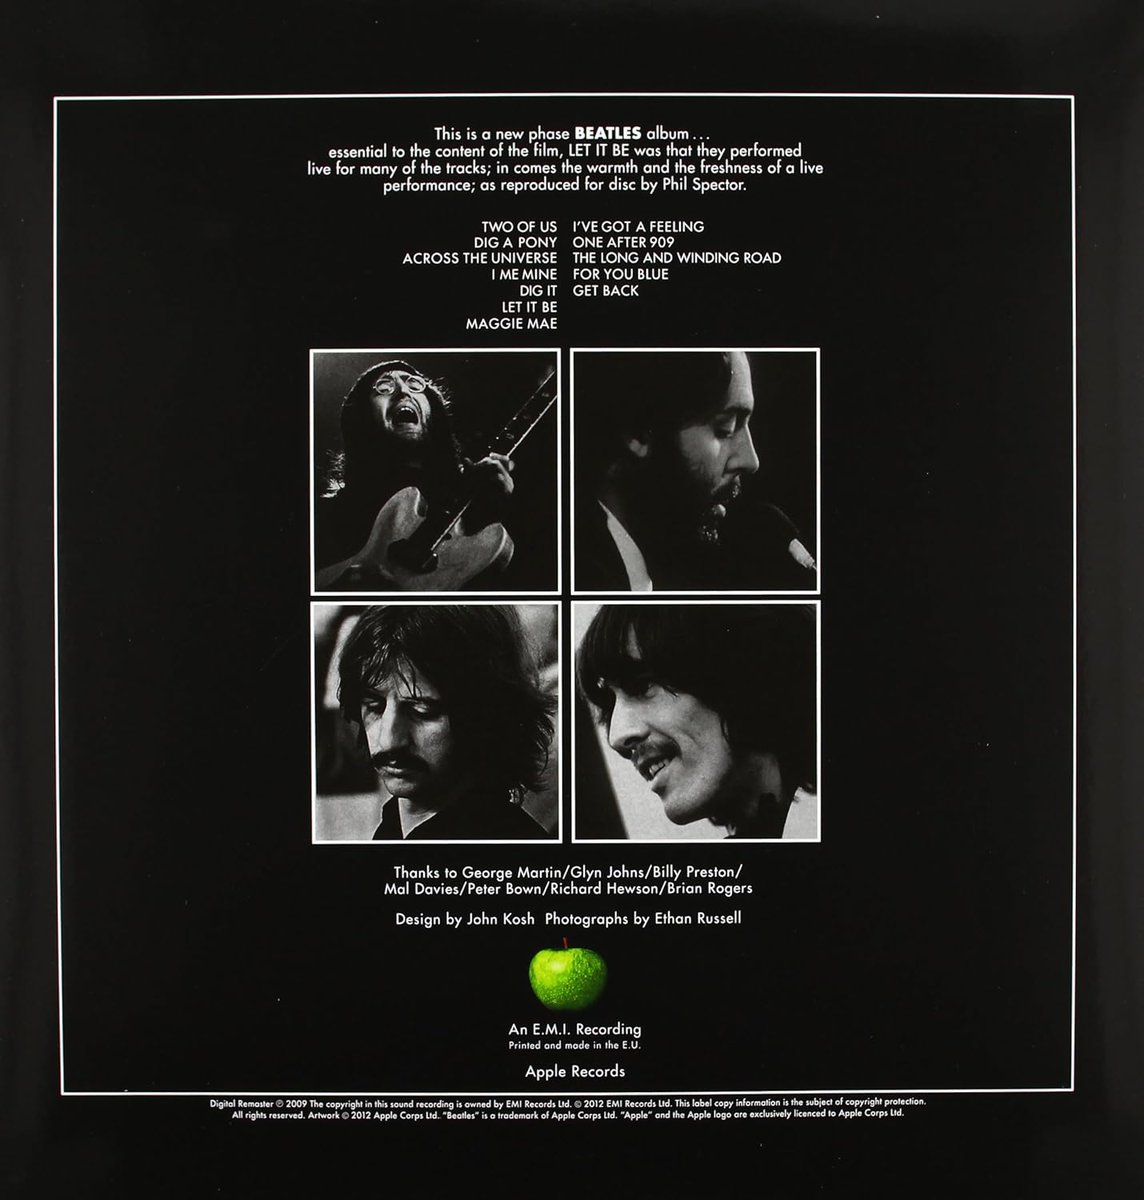 #MusicHistory #OTD 1970, #TheBeatles released their final & 12 album, #LetItBe, one month after the band's public break up. The cover of George, John, Paul & Ringo, was taken by Ethan Russell during the Twickenham Studios rehearsal sessions of Let It Be in early January of 1969.